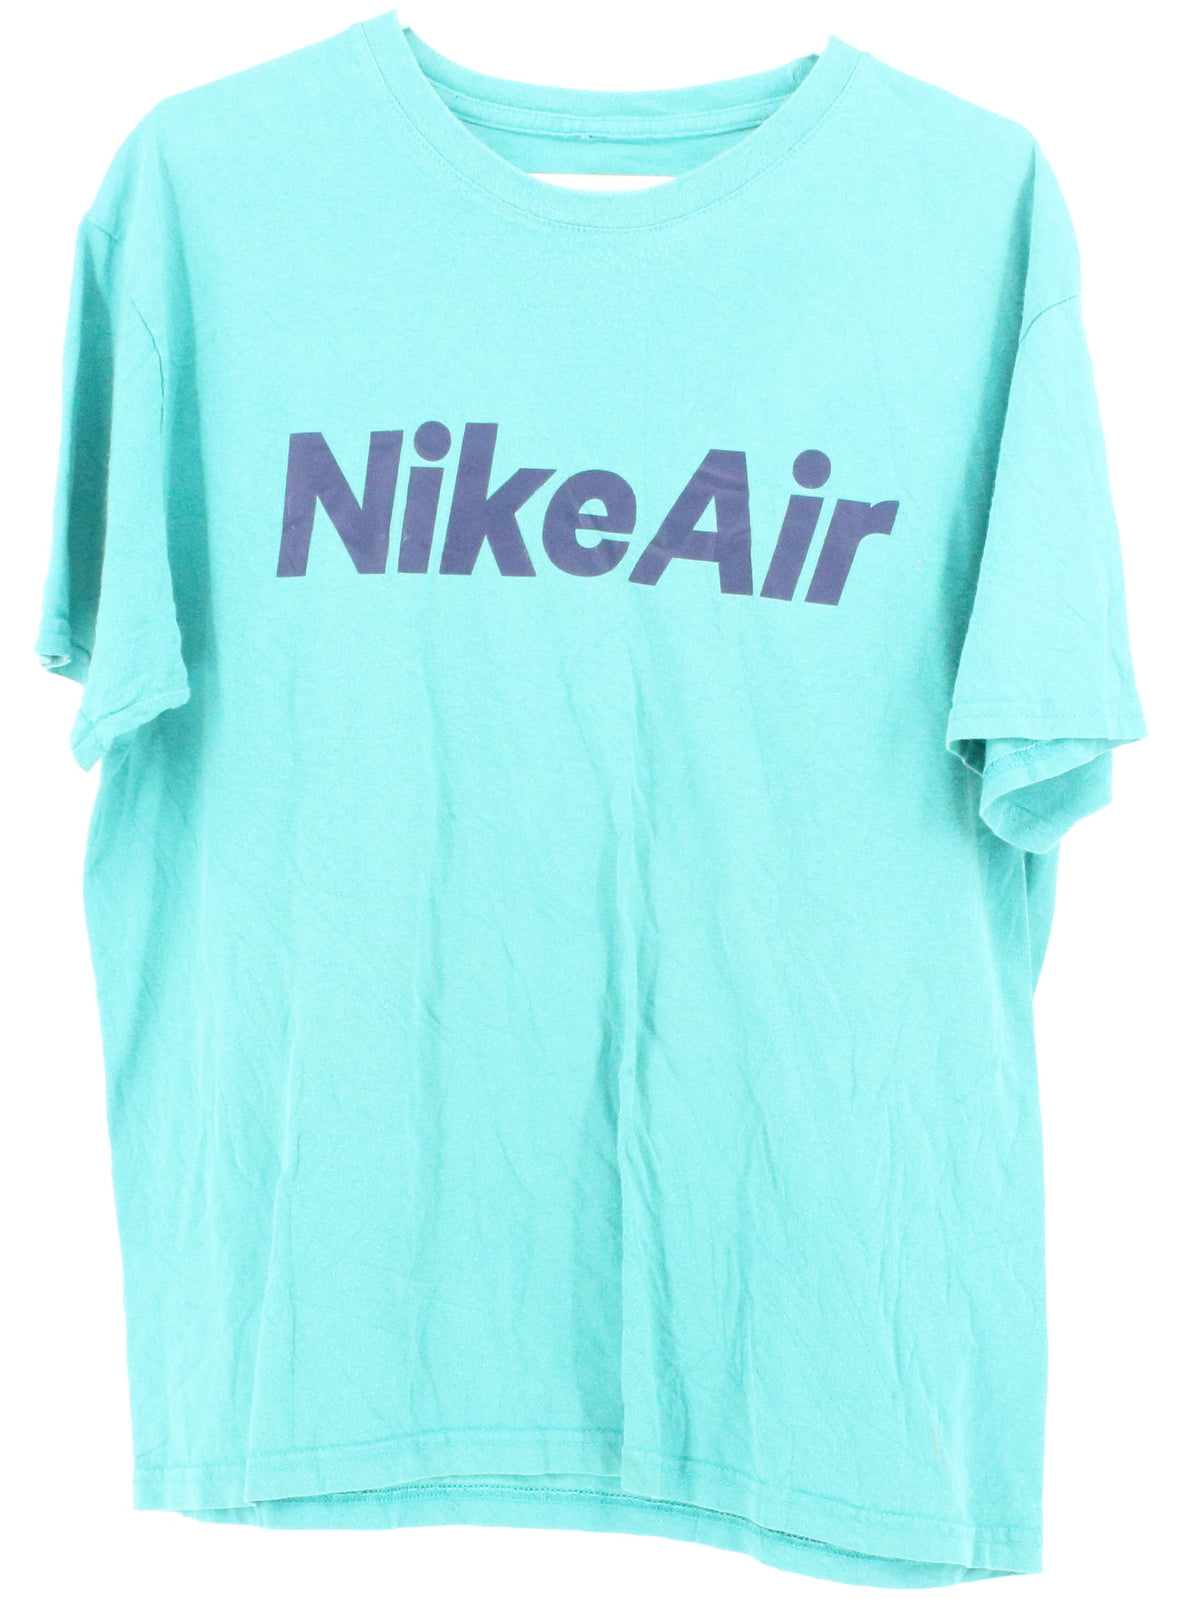 Nike Air Turquoise Front Graphic T-Shirt